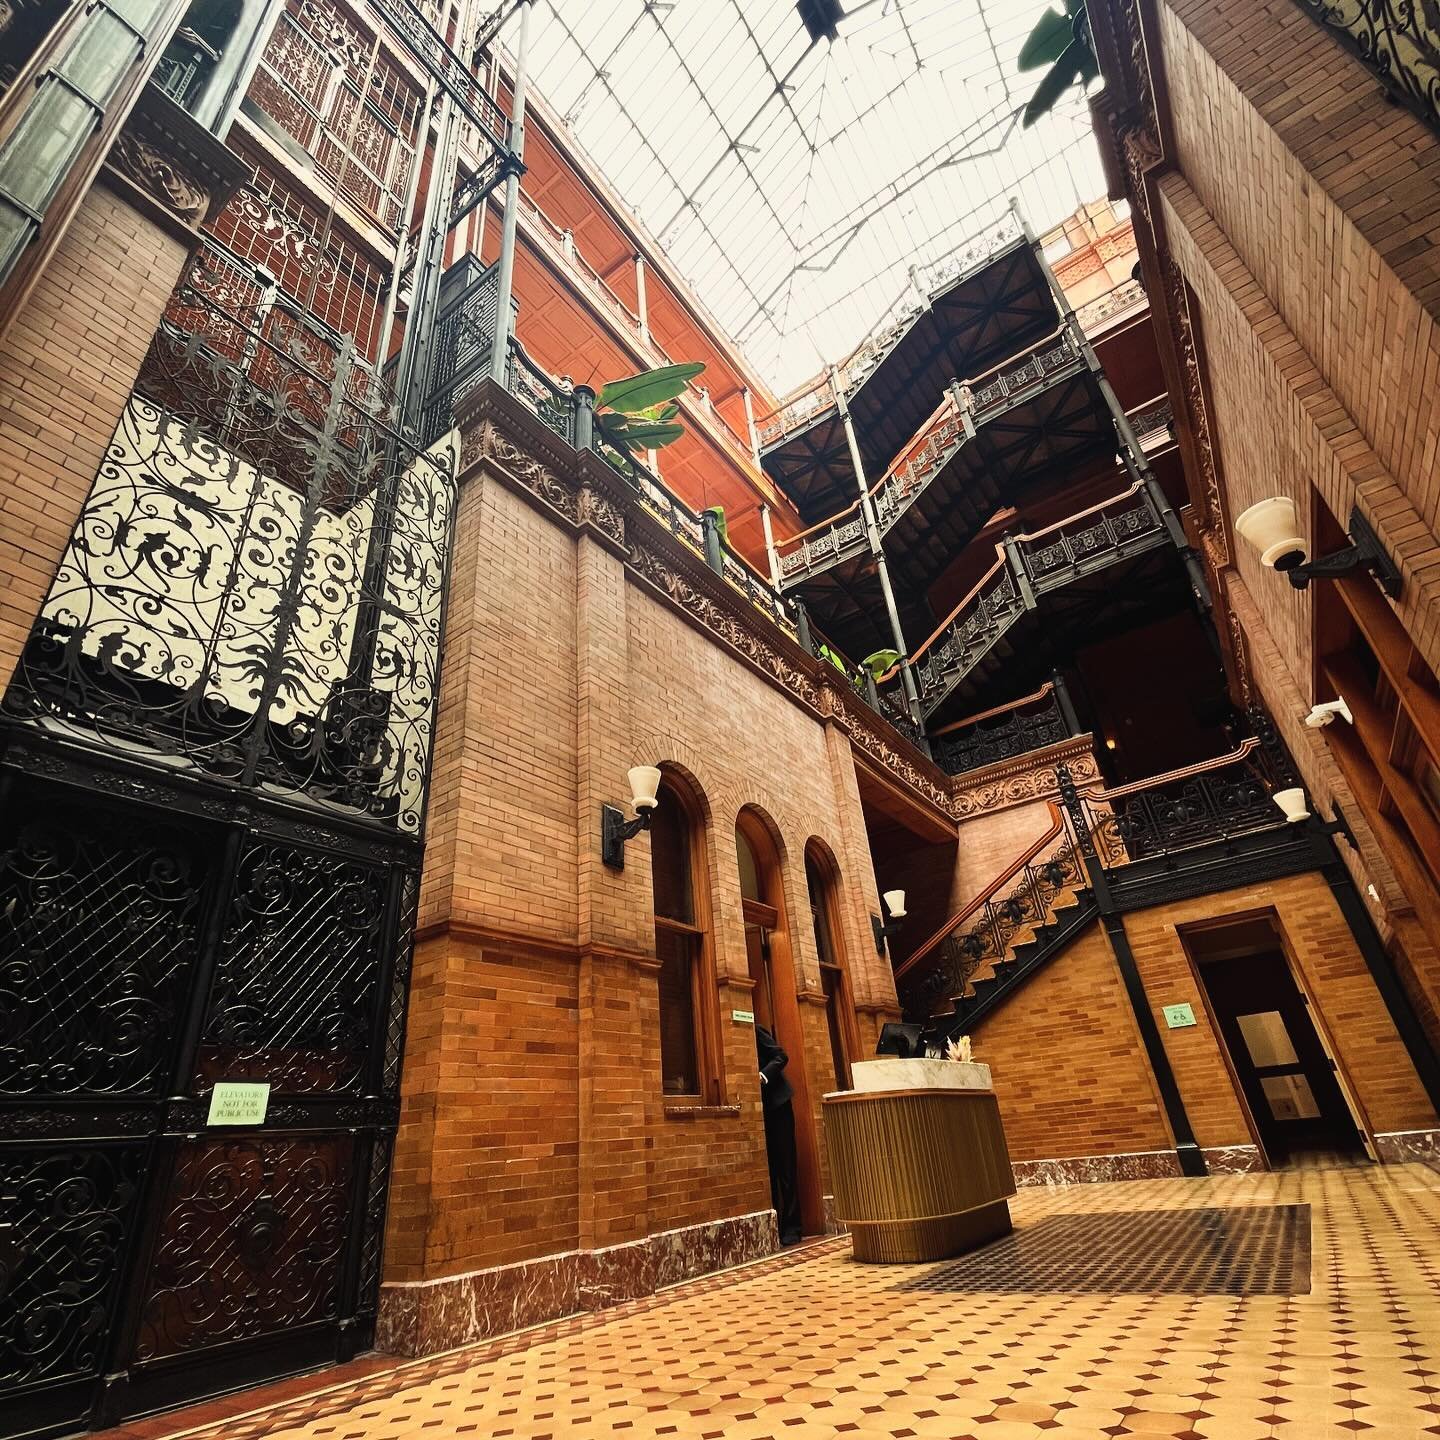 The Bradbury Building in LA did not disappoint.

There&rsquo;s so much amazing architecture in LA. And compared to NYC, it&rsquo;s as if everything has been doubled in size. It&rsquo;s also nice having my own &ldquo;private tour guide&rdquo; while vi